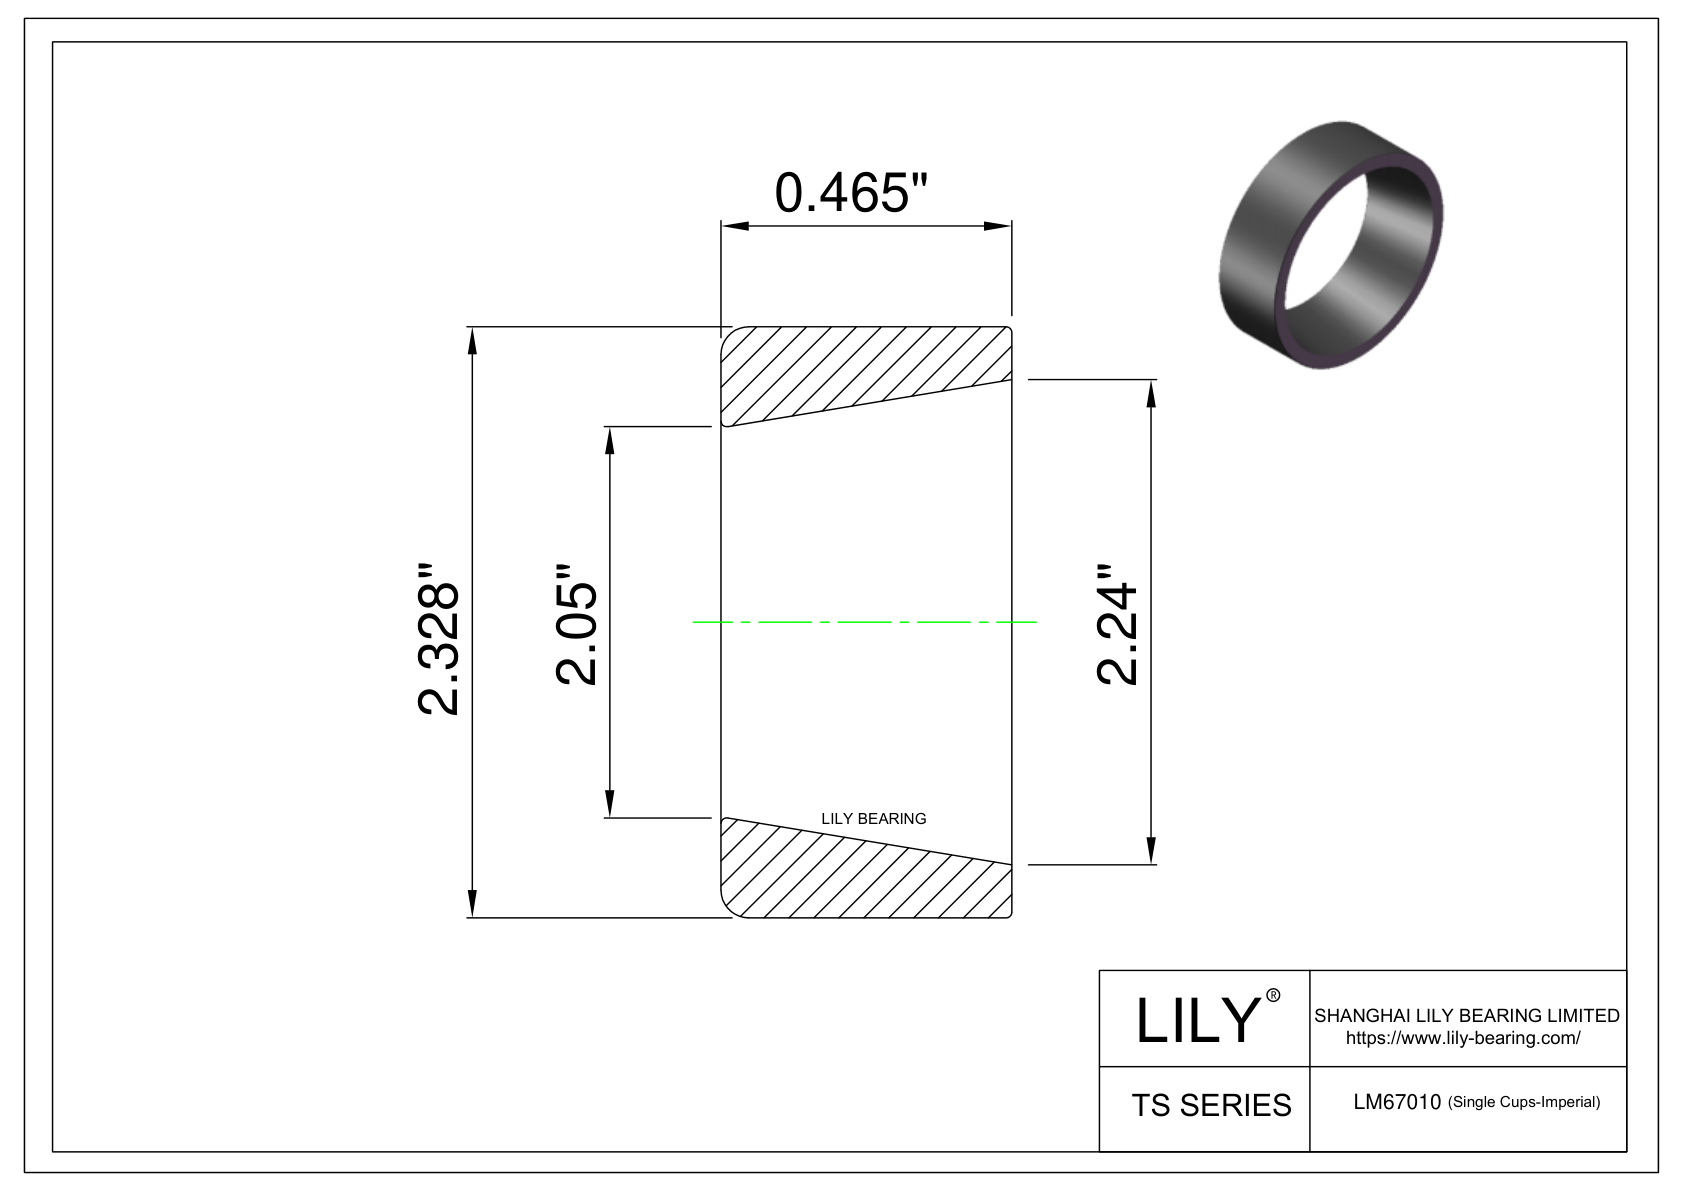 LM67010 Single Cups (Imperial) cad drawing